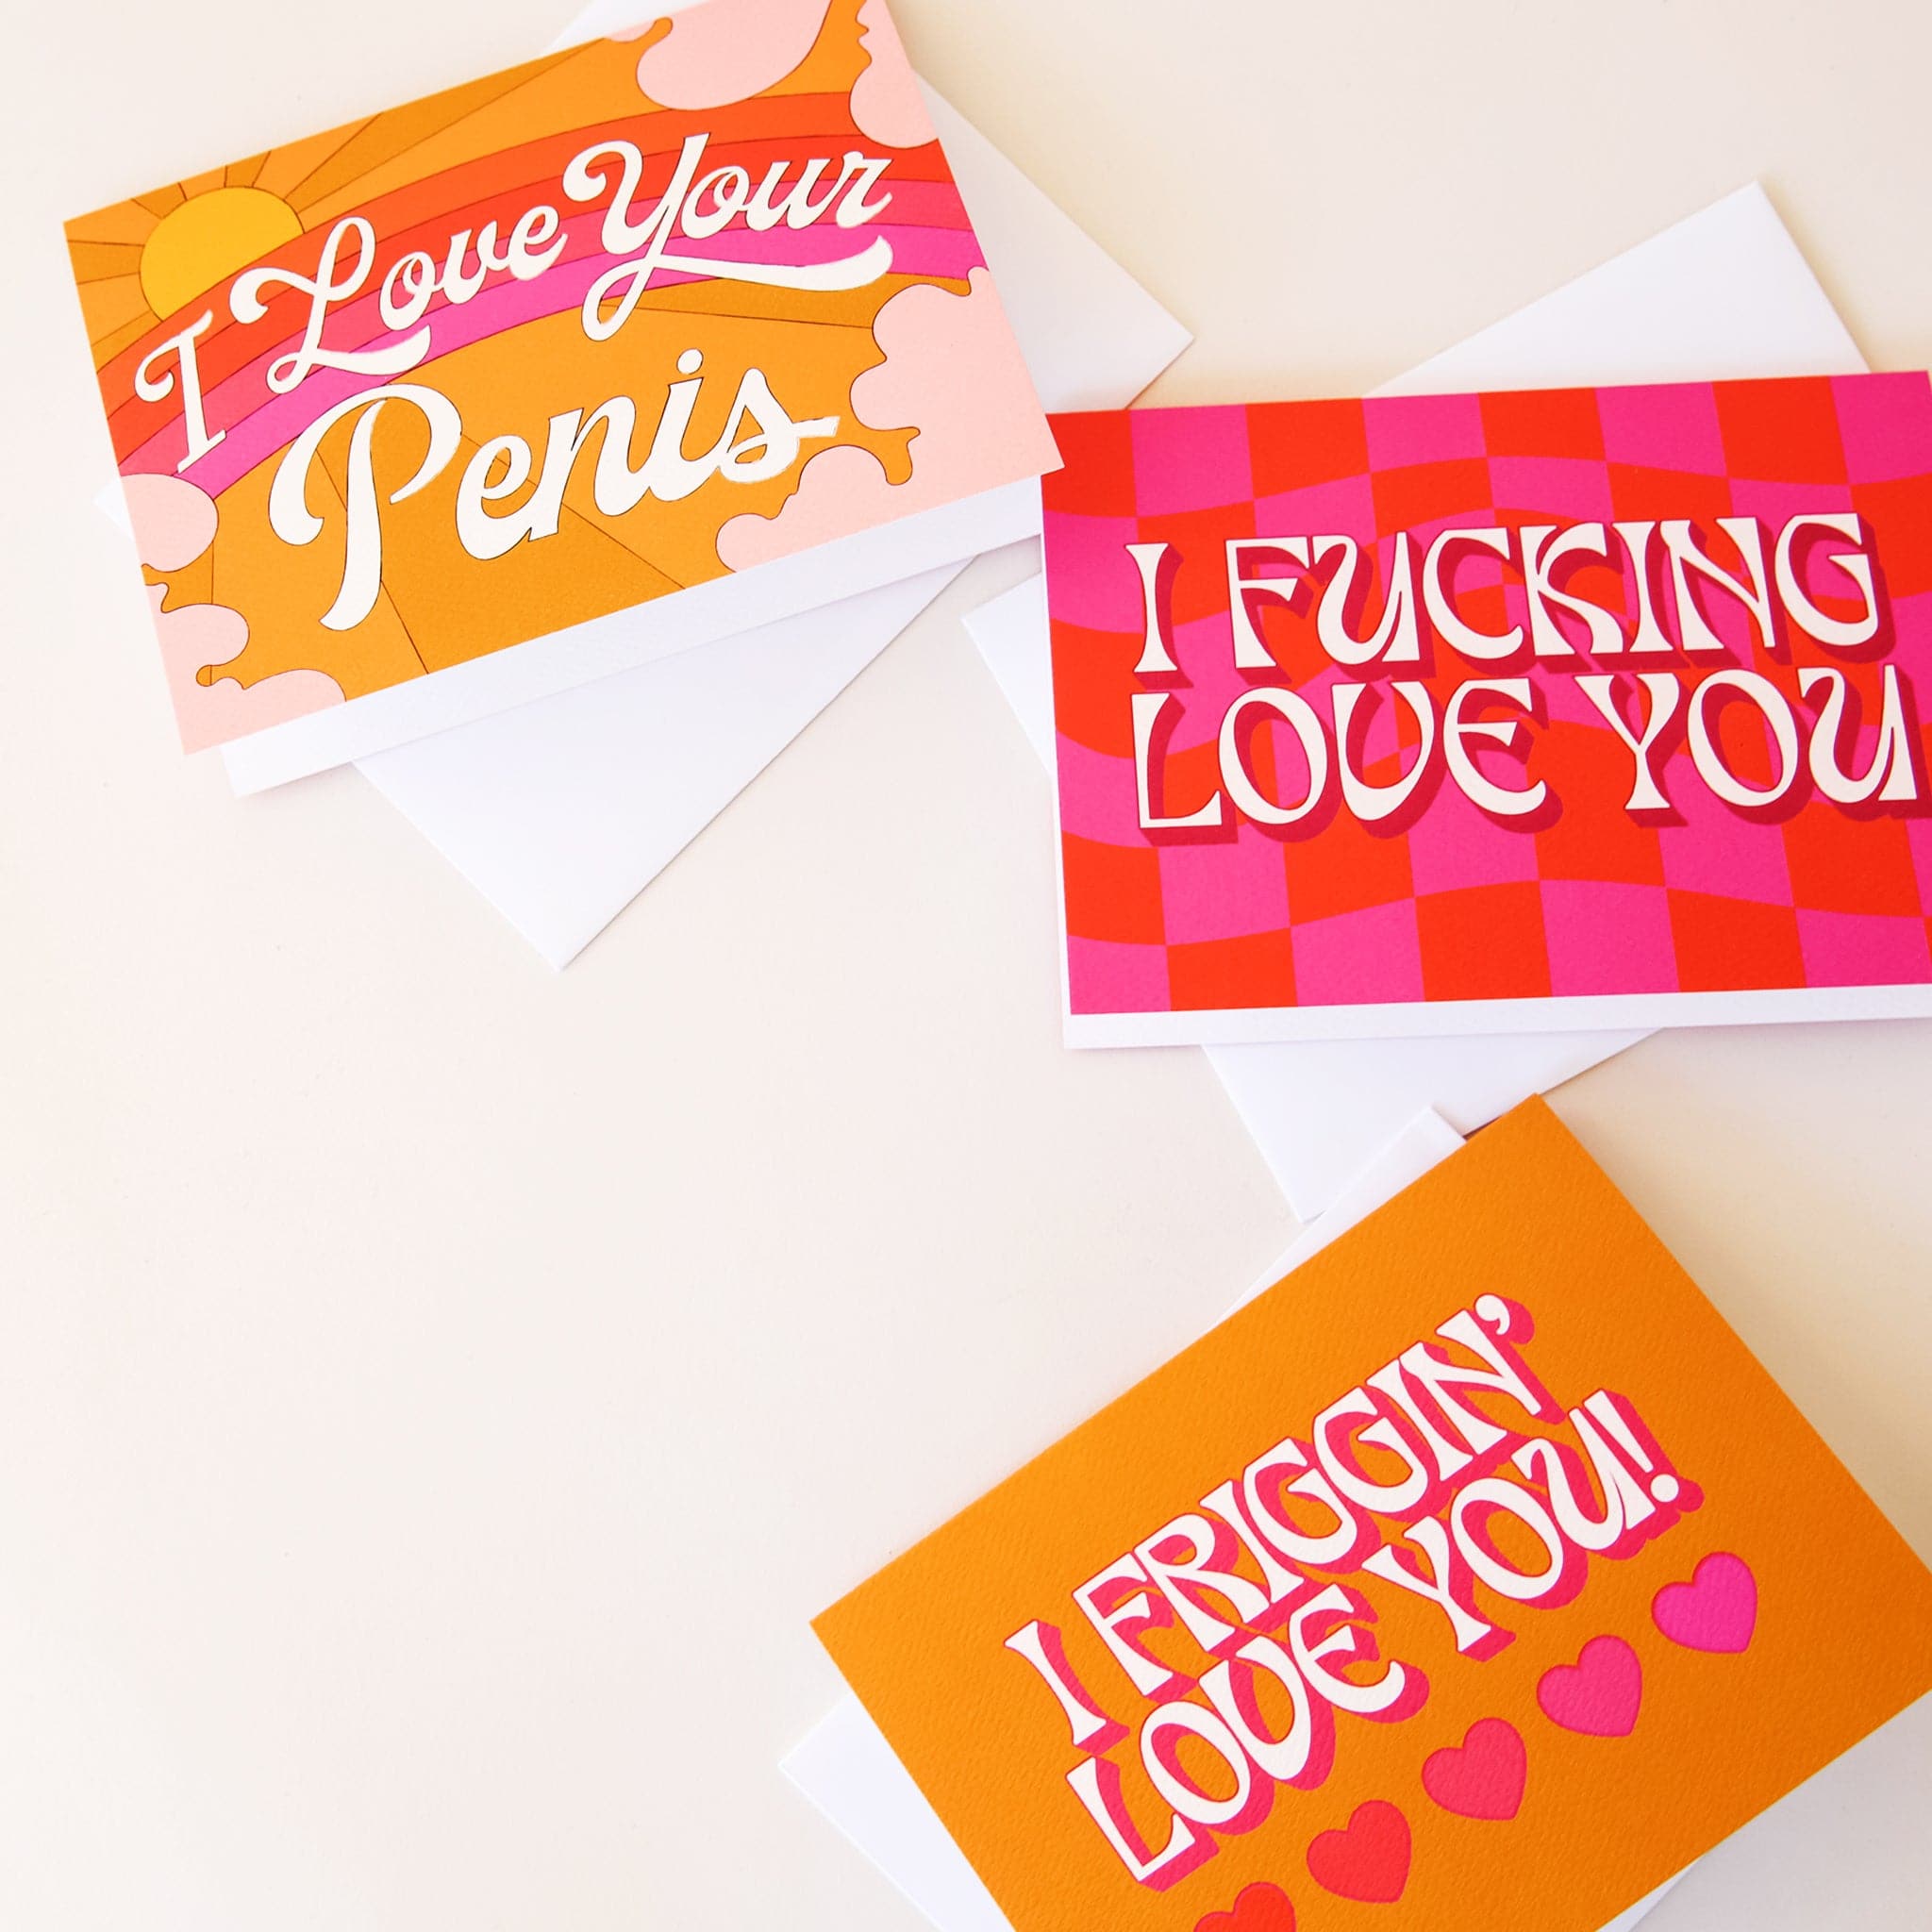 Three of our Sunshine Studios cards on a white background. Each card has bright, rich color, reminiscent of the 70's with warm tones. The first card says "I love your penis". It features a rainbow, sun, and clouds. The second card has a hot pink and deep orange wavy checker background. The script on the card is white and reads "I fucking love you". The third card has a solid gold color and reads "I friggin' love you!". There are five little hearts, each a different color.